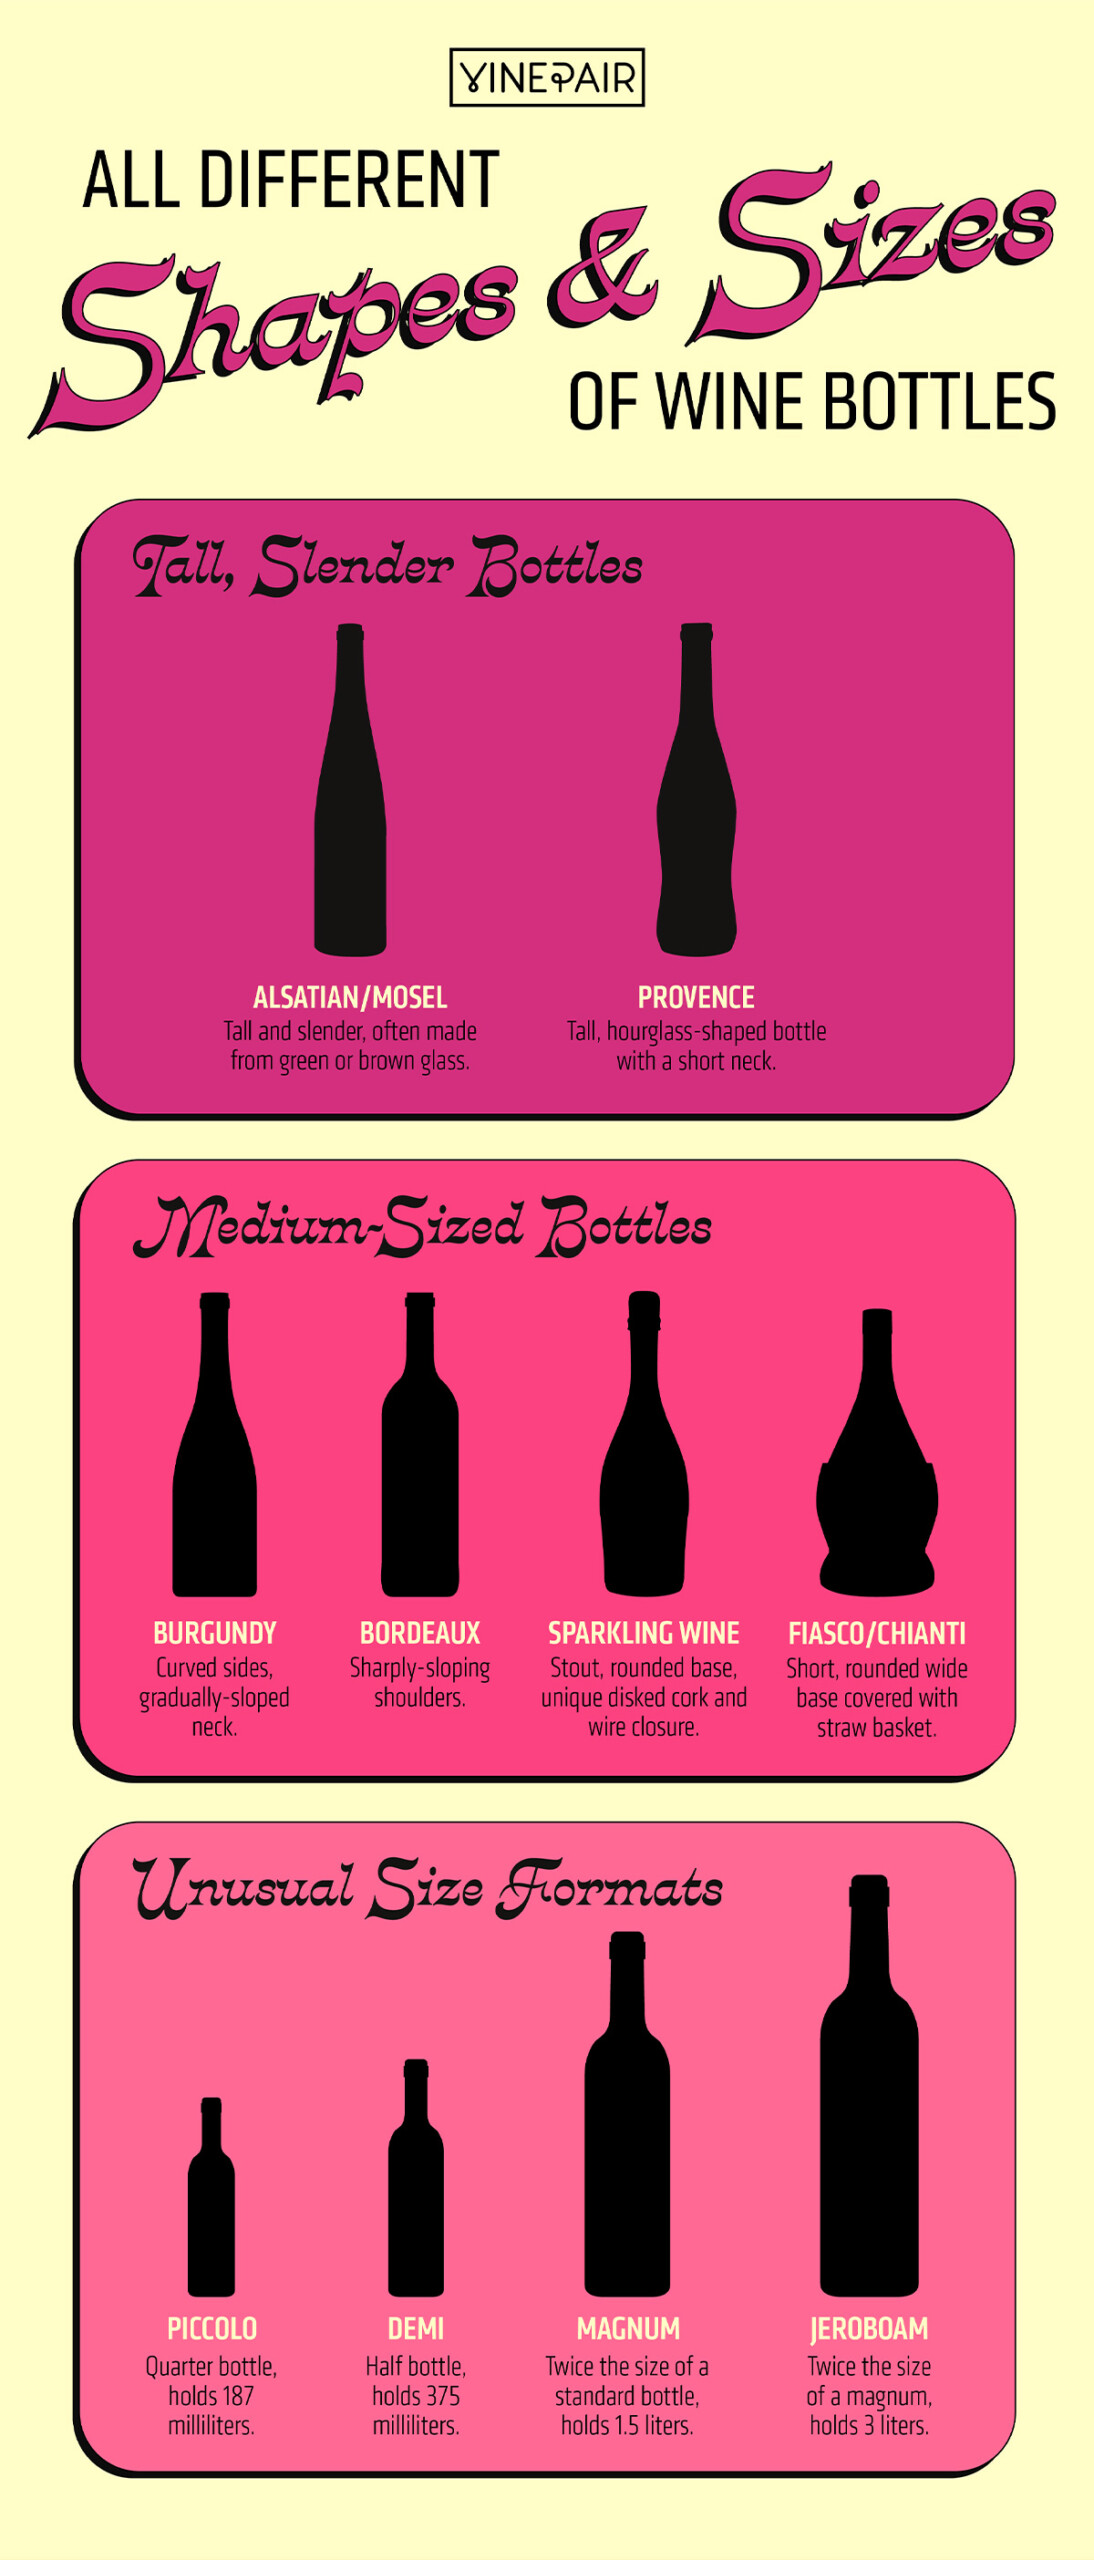 A Visual Guide to All the Different Shapes and Sizes of Wine Bottles